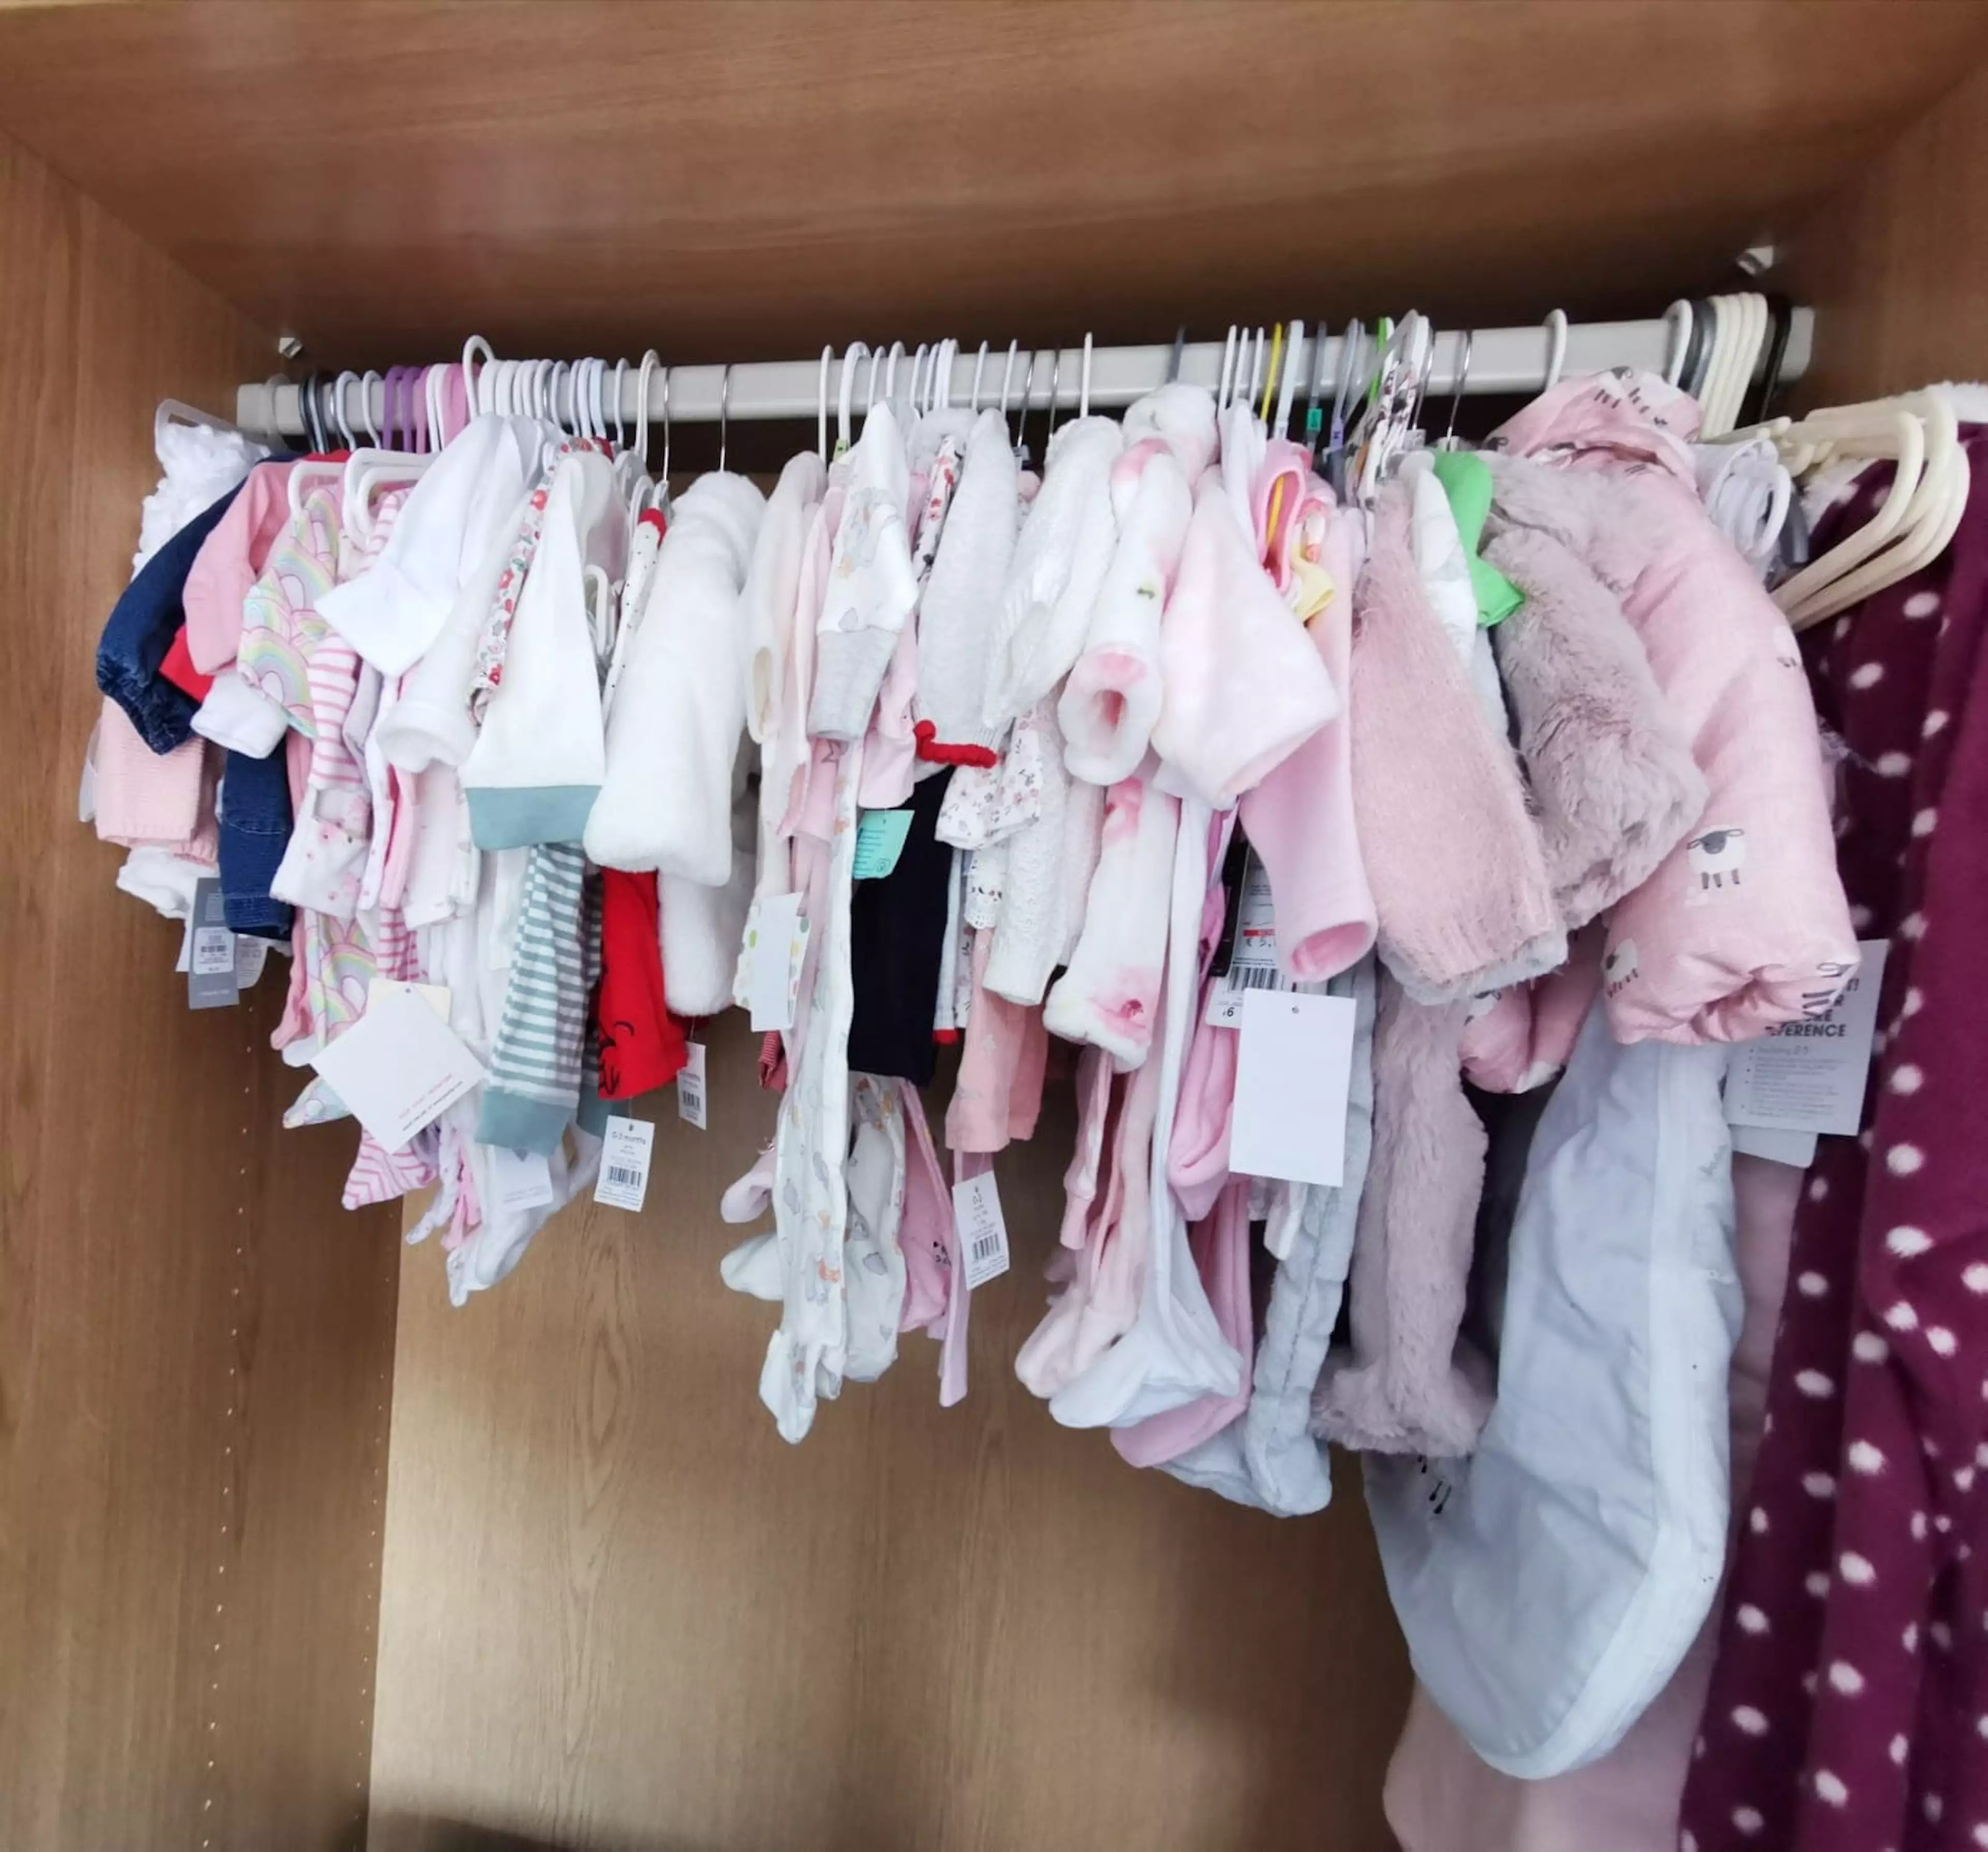 The family bought loads of pink clothes in anticipation of their new 'daughter'.